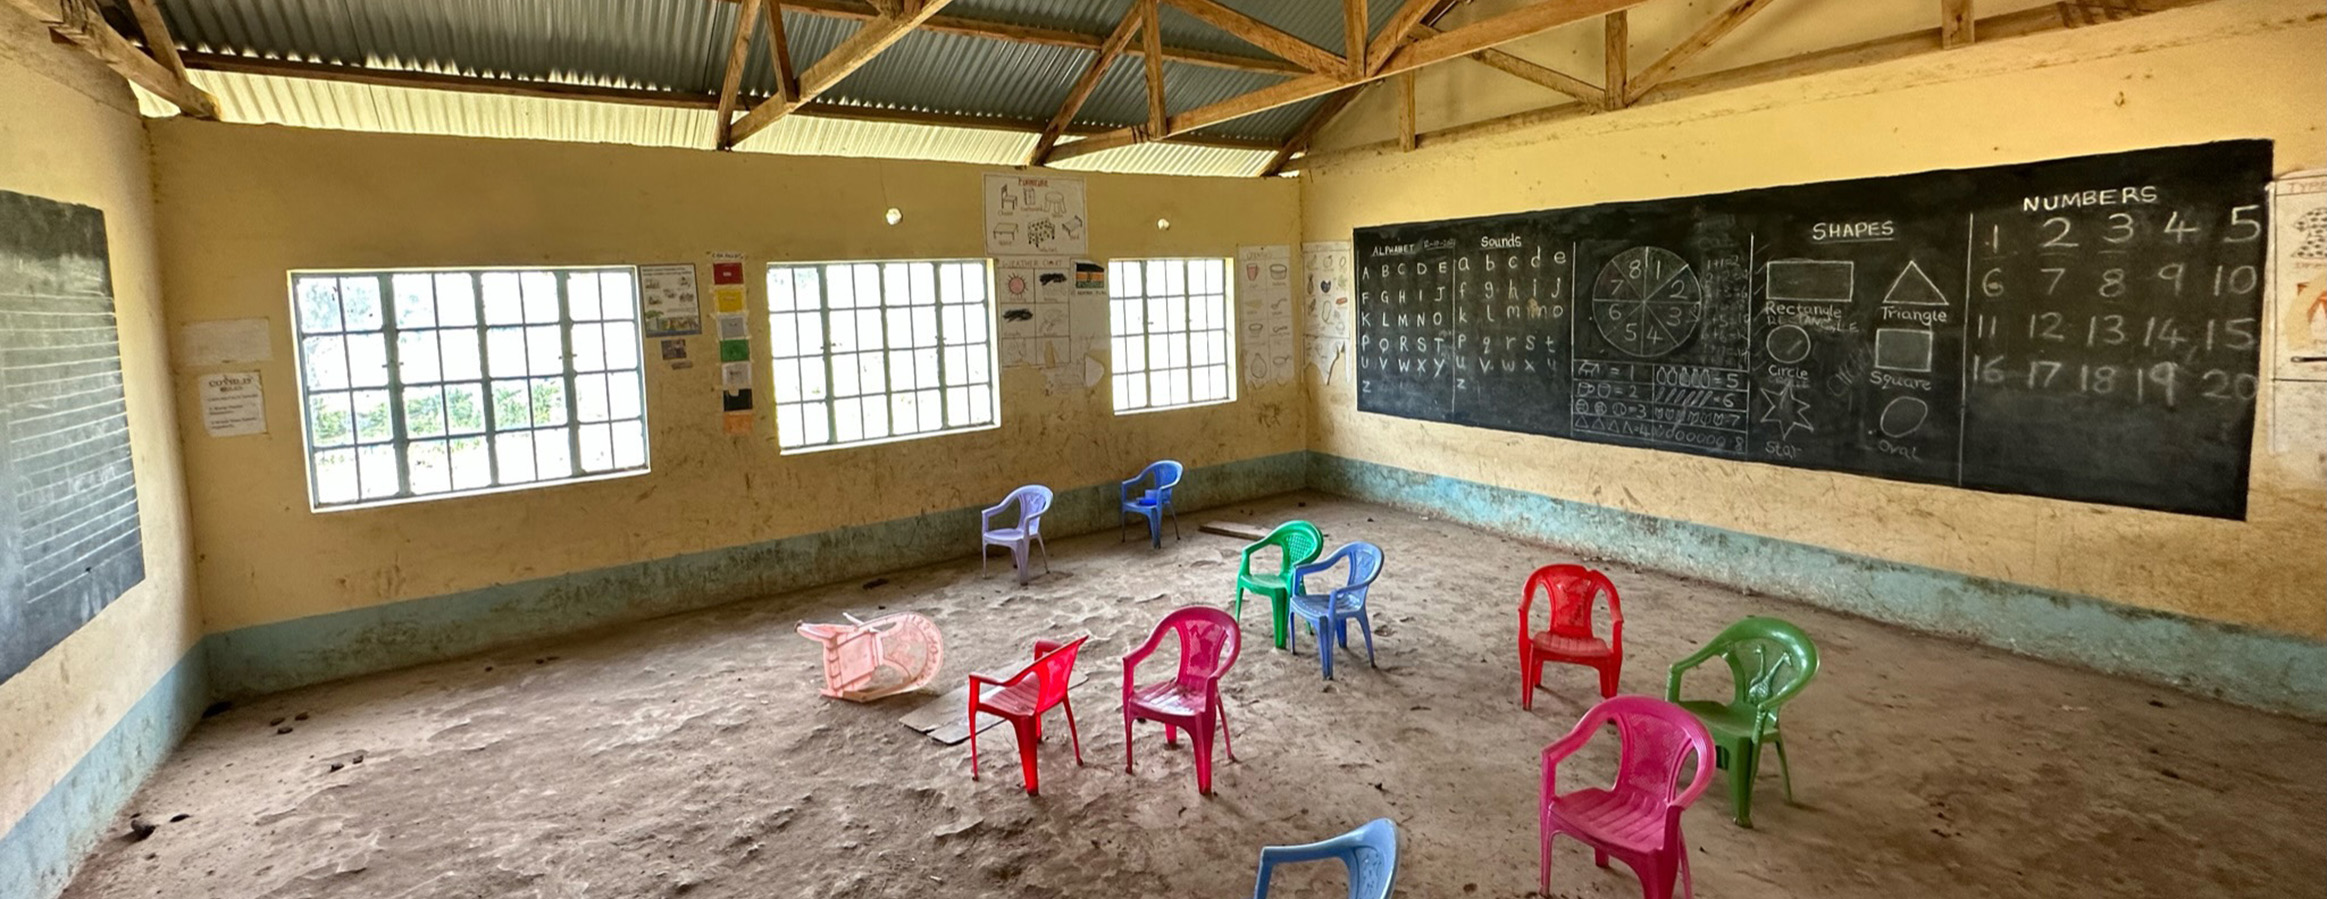 An evocative image of a Kenyan classroom with overturned chairs on a dusty clay floor, symbolizing the stark educational needs.